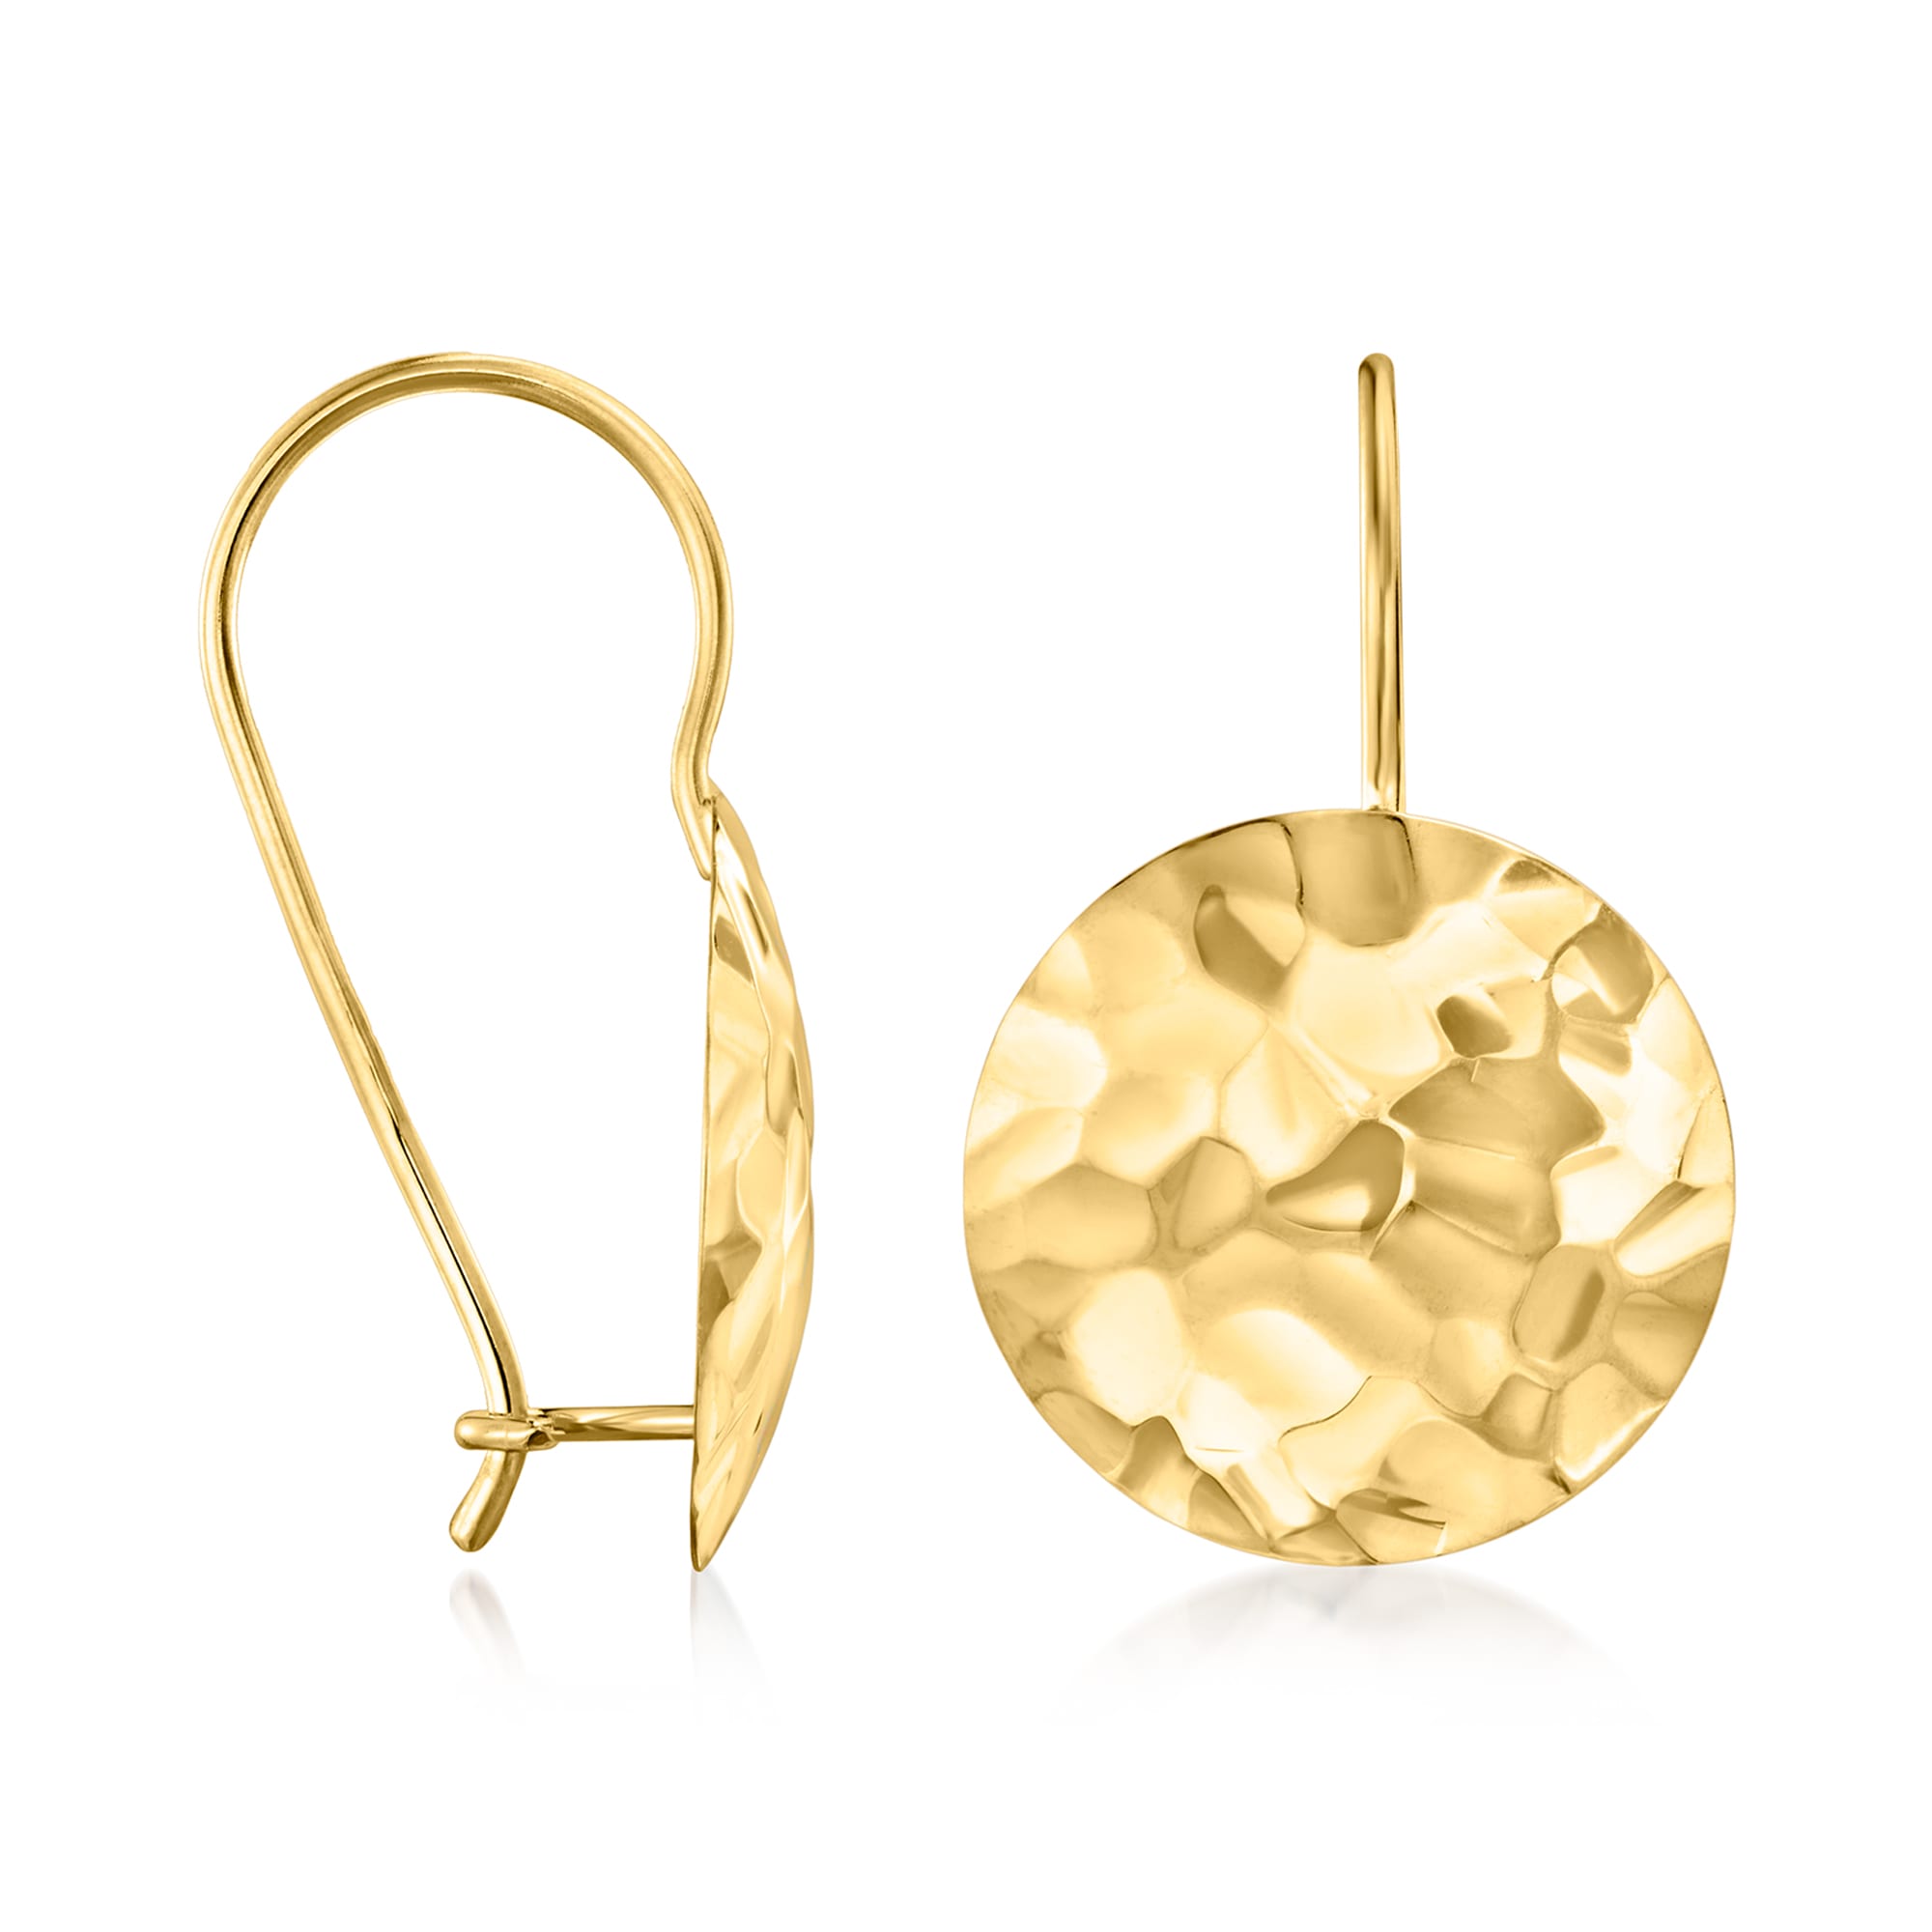 Hammered Gold Earrings - Leverback Earrings – Austin Down to Earth